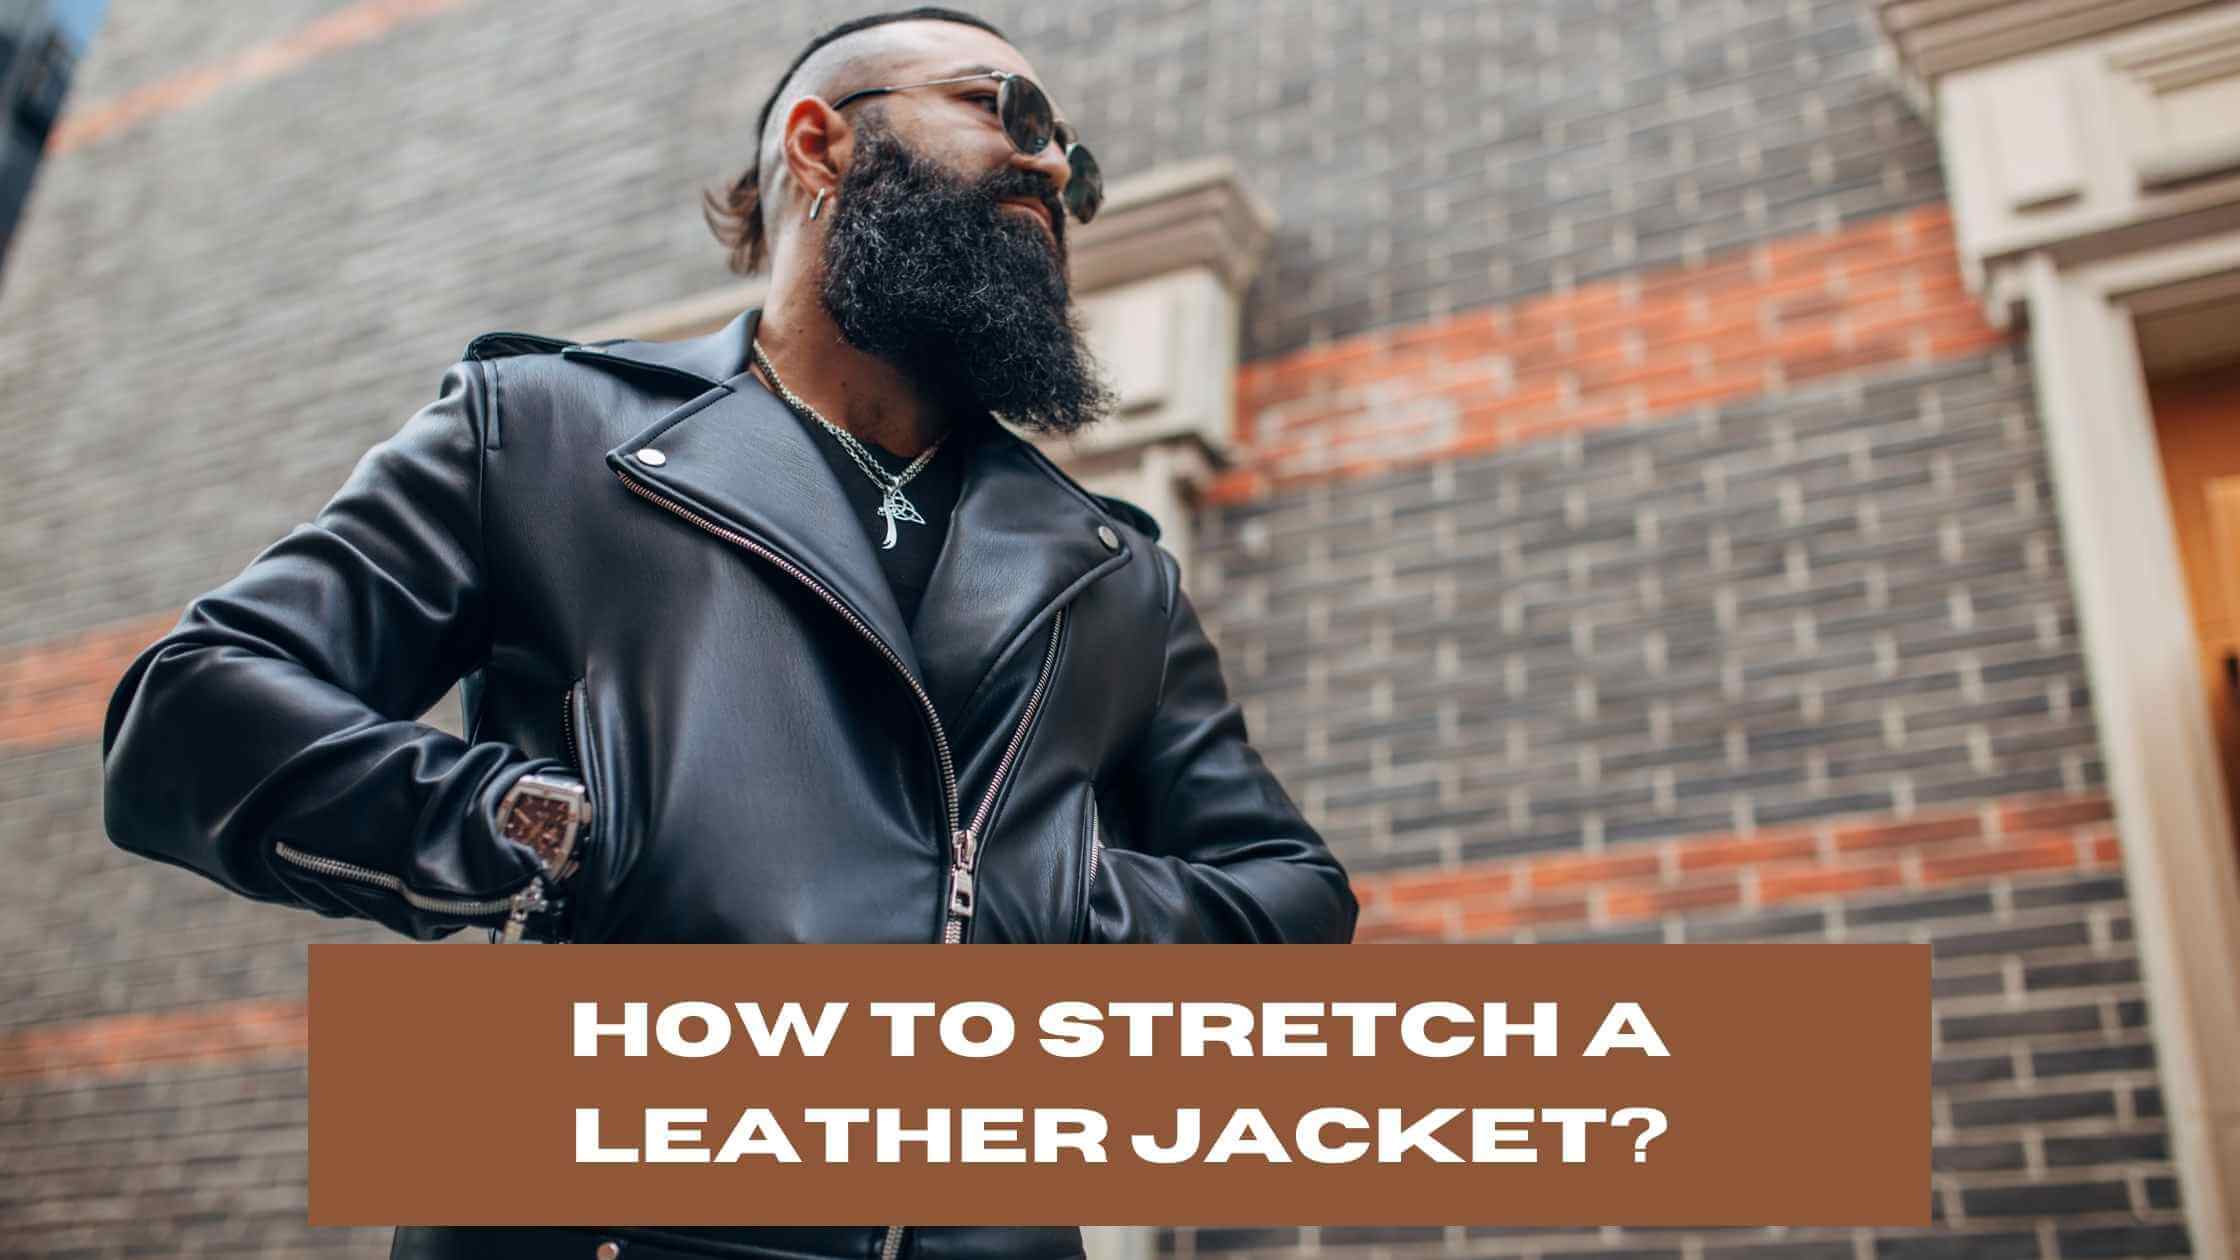 How to Stretch a Leather Jacket